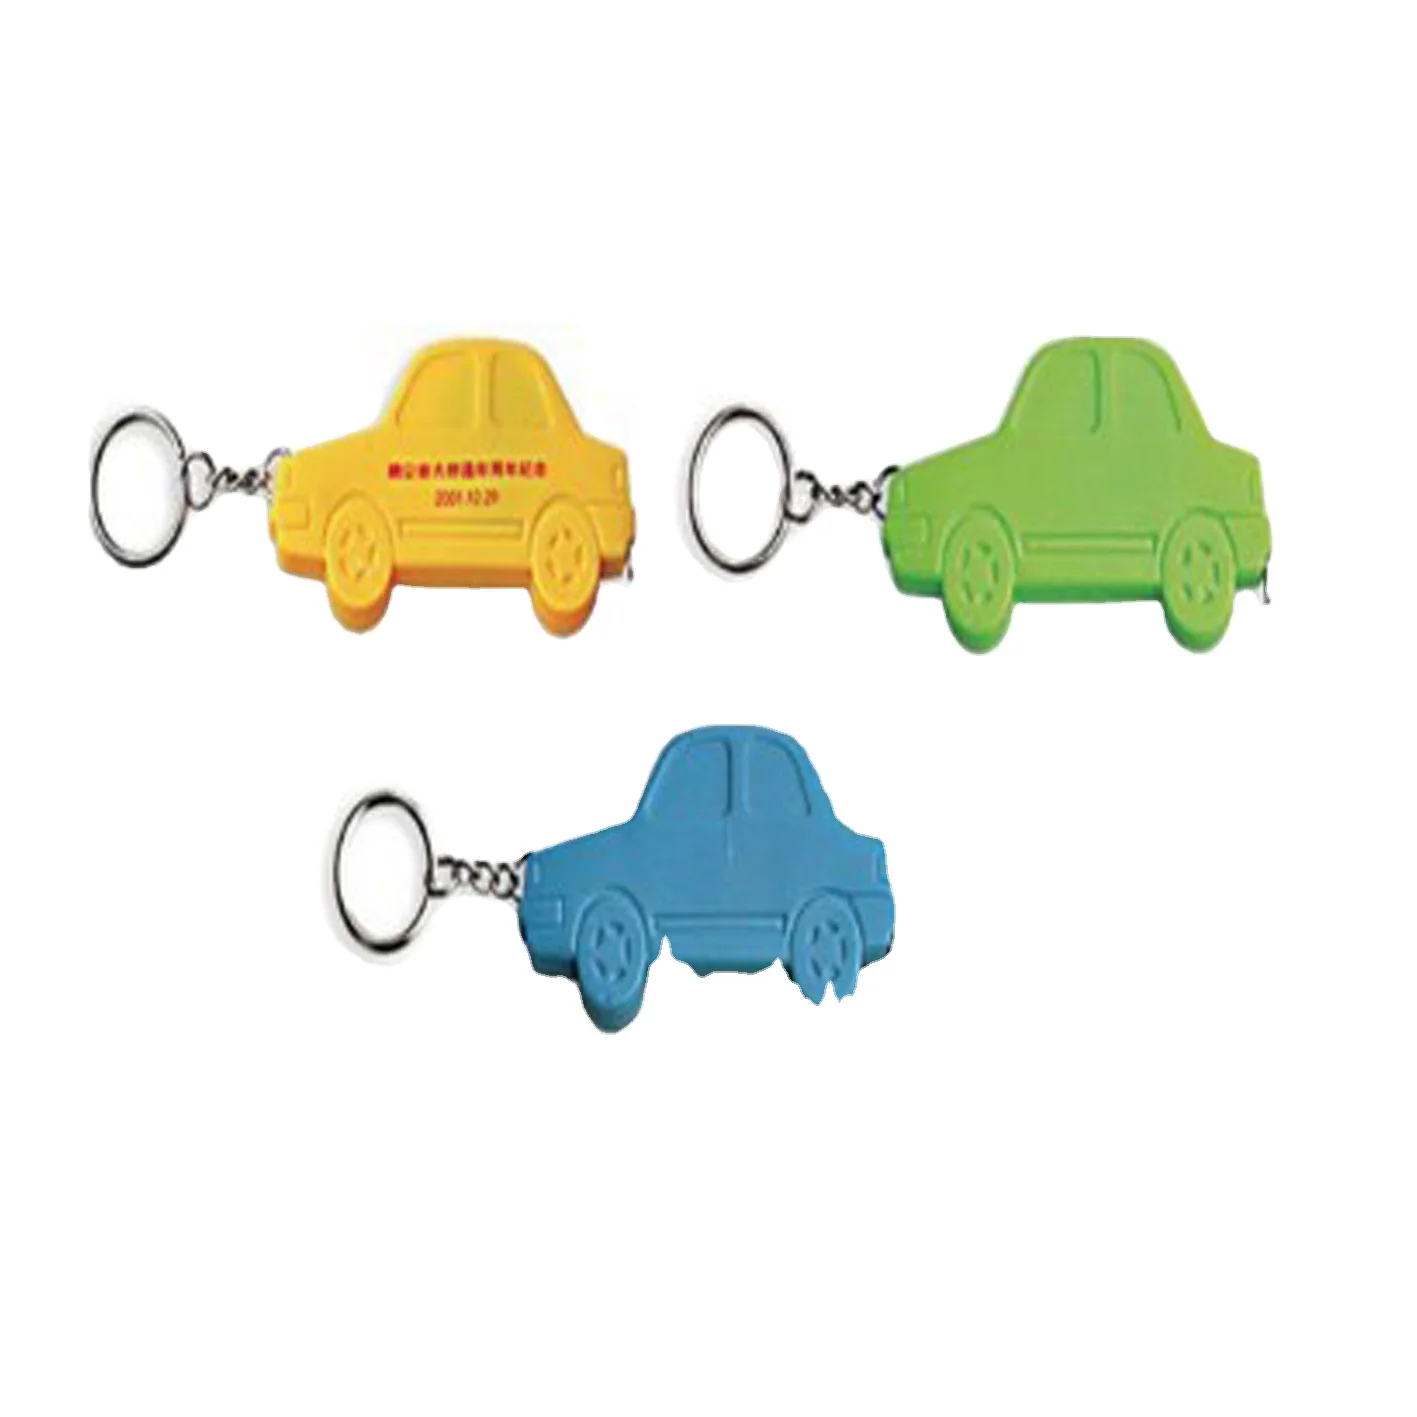 

promotional gift car shape stainless steel 1 meter tape measure with key chains inches measuring tape